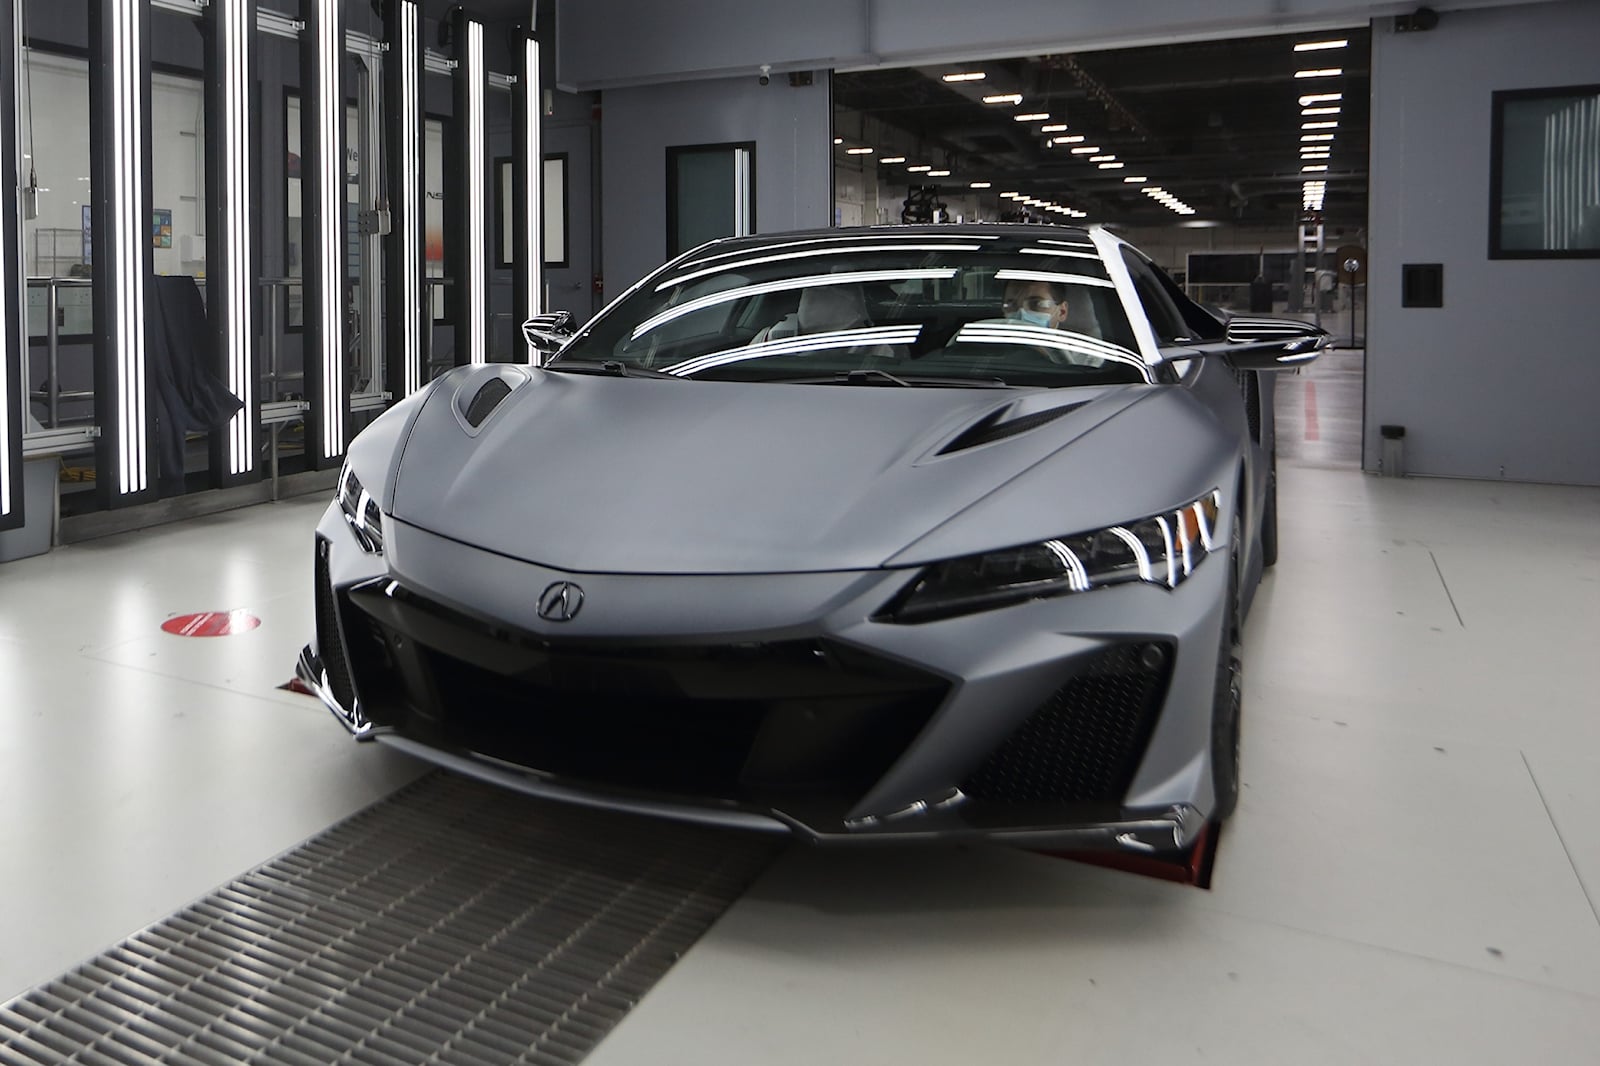 600-HP Acura NSX Type S Production Has Started